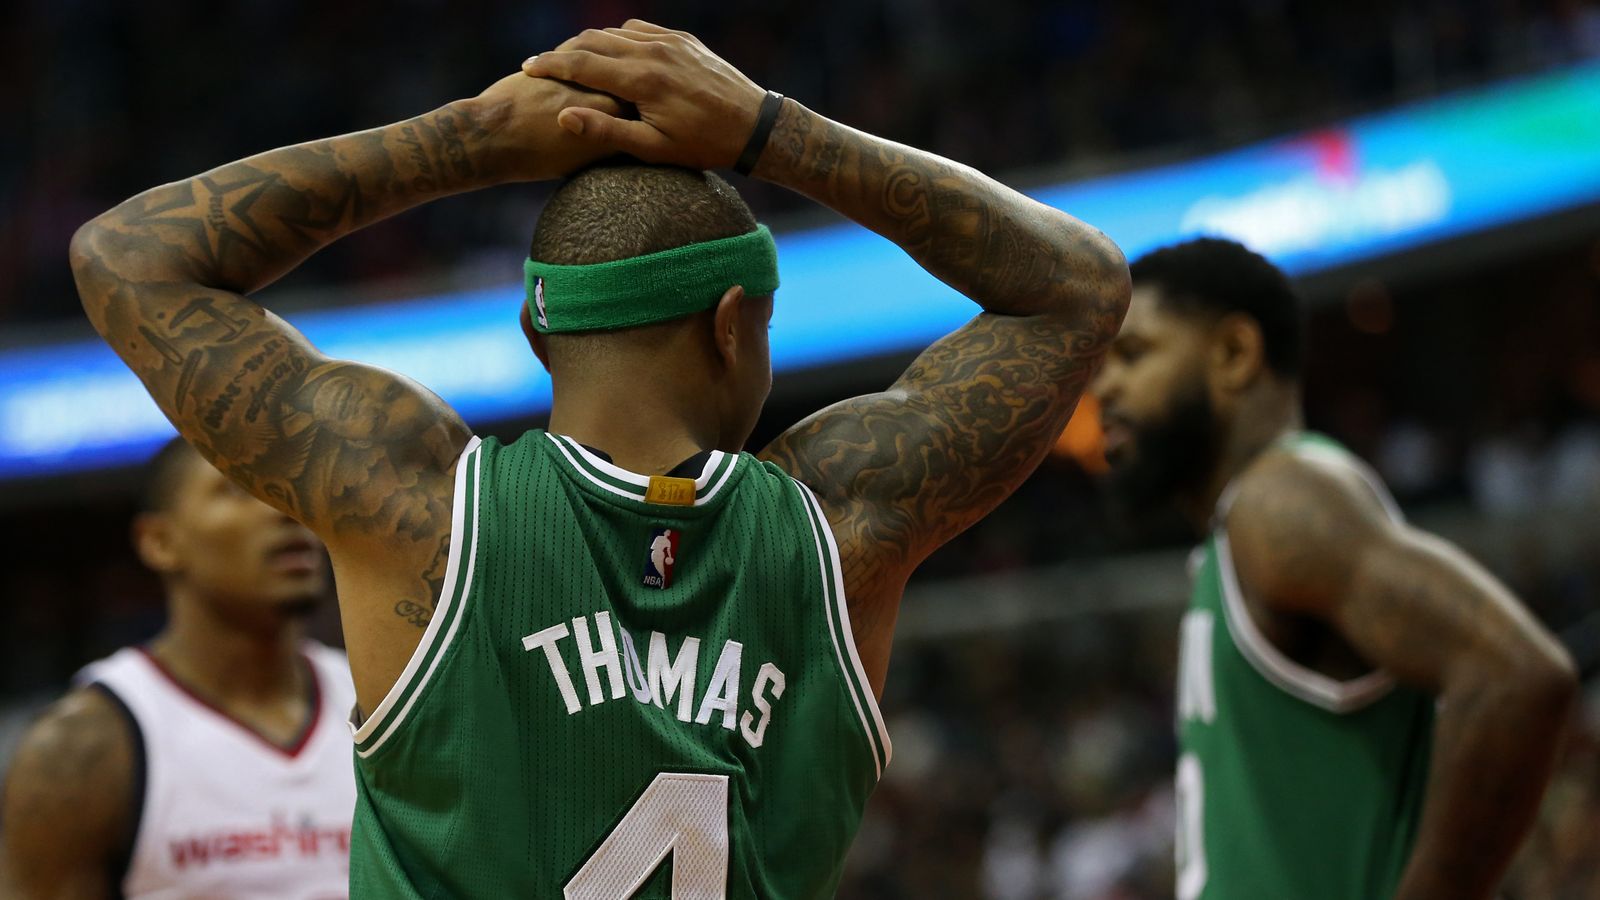 Isaiah Thomas says being traded by Celtics 'hurt a lot' - The Boston Globe